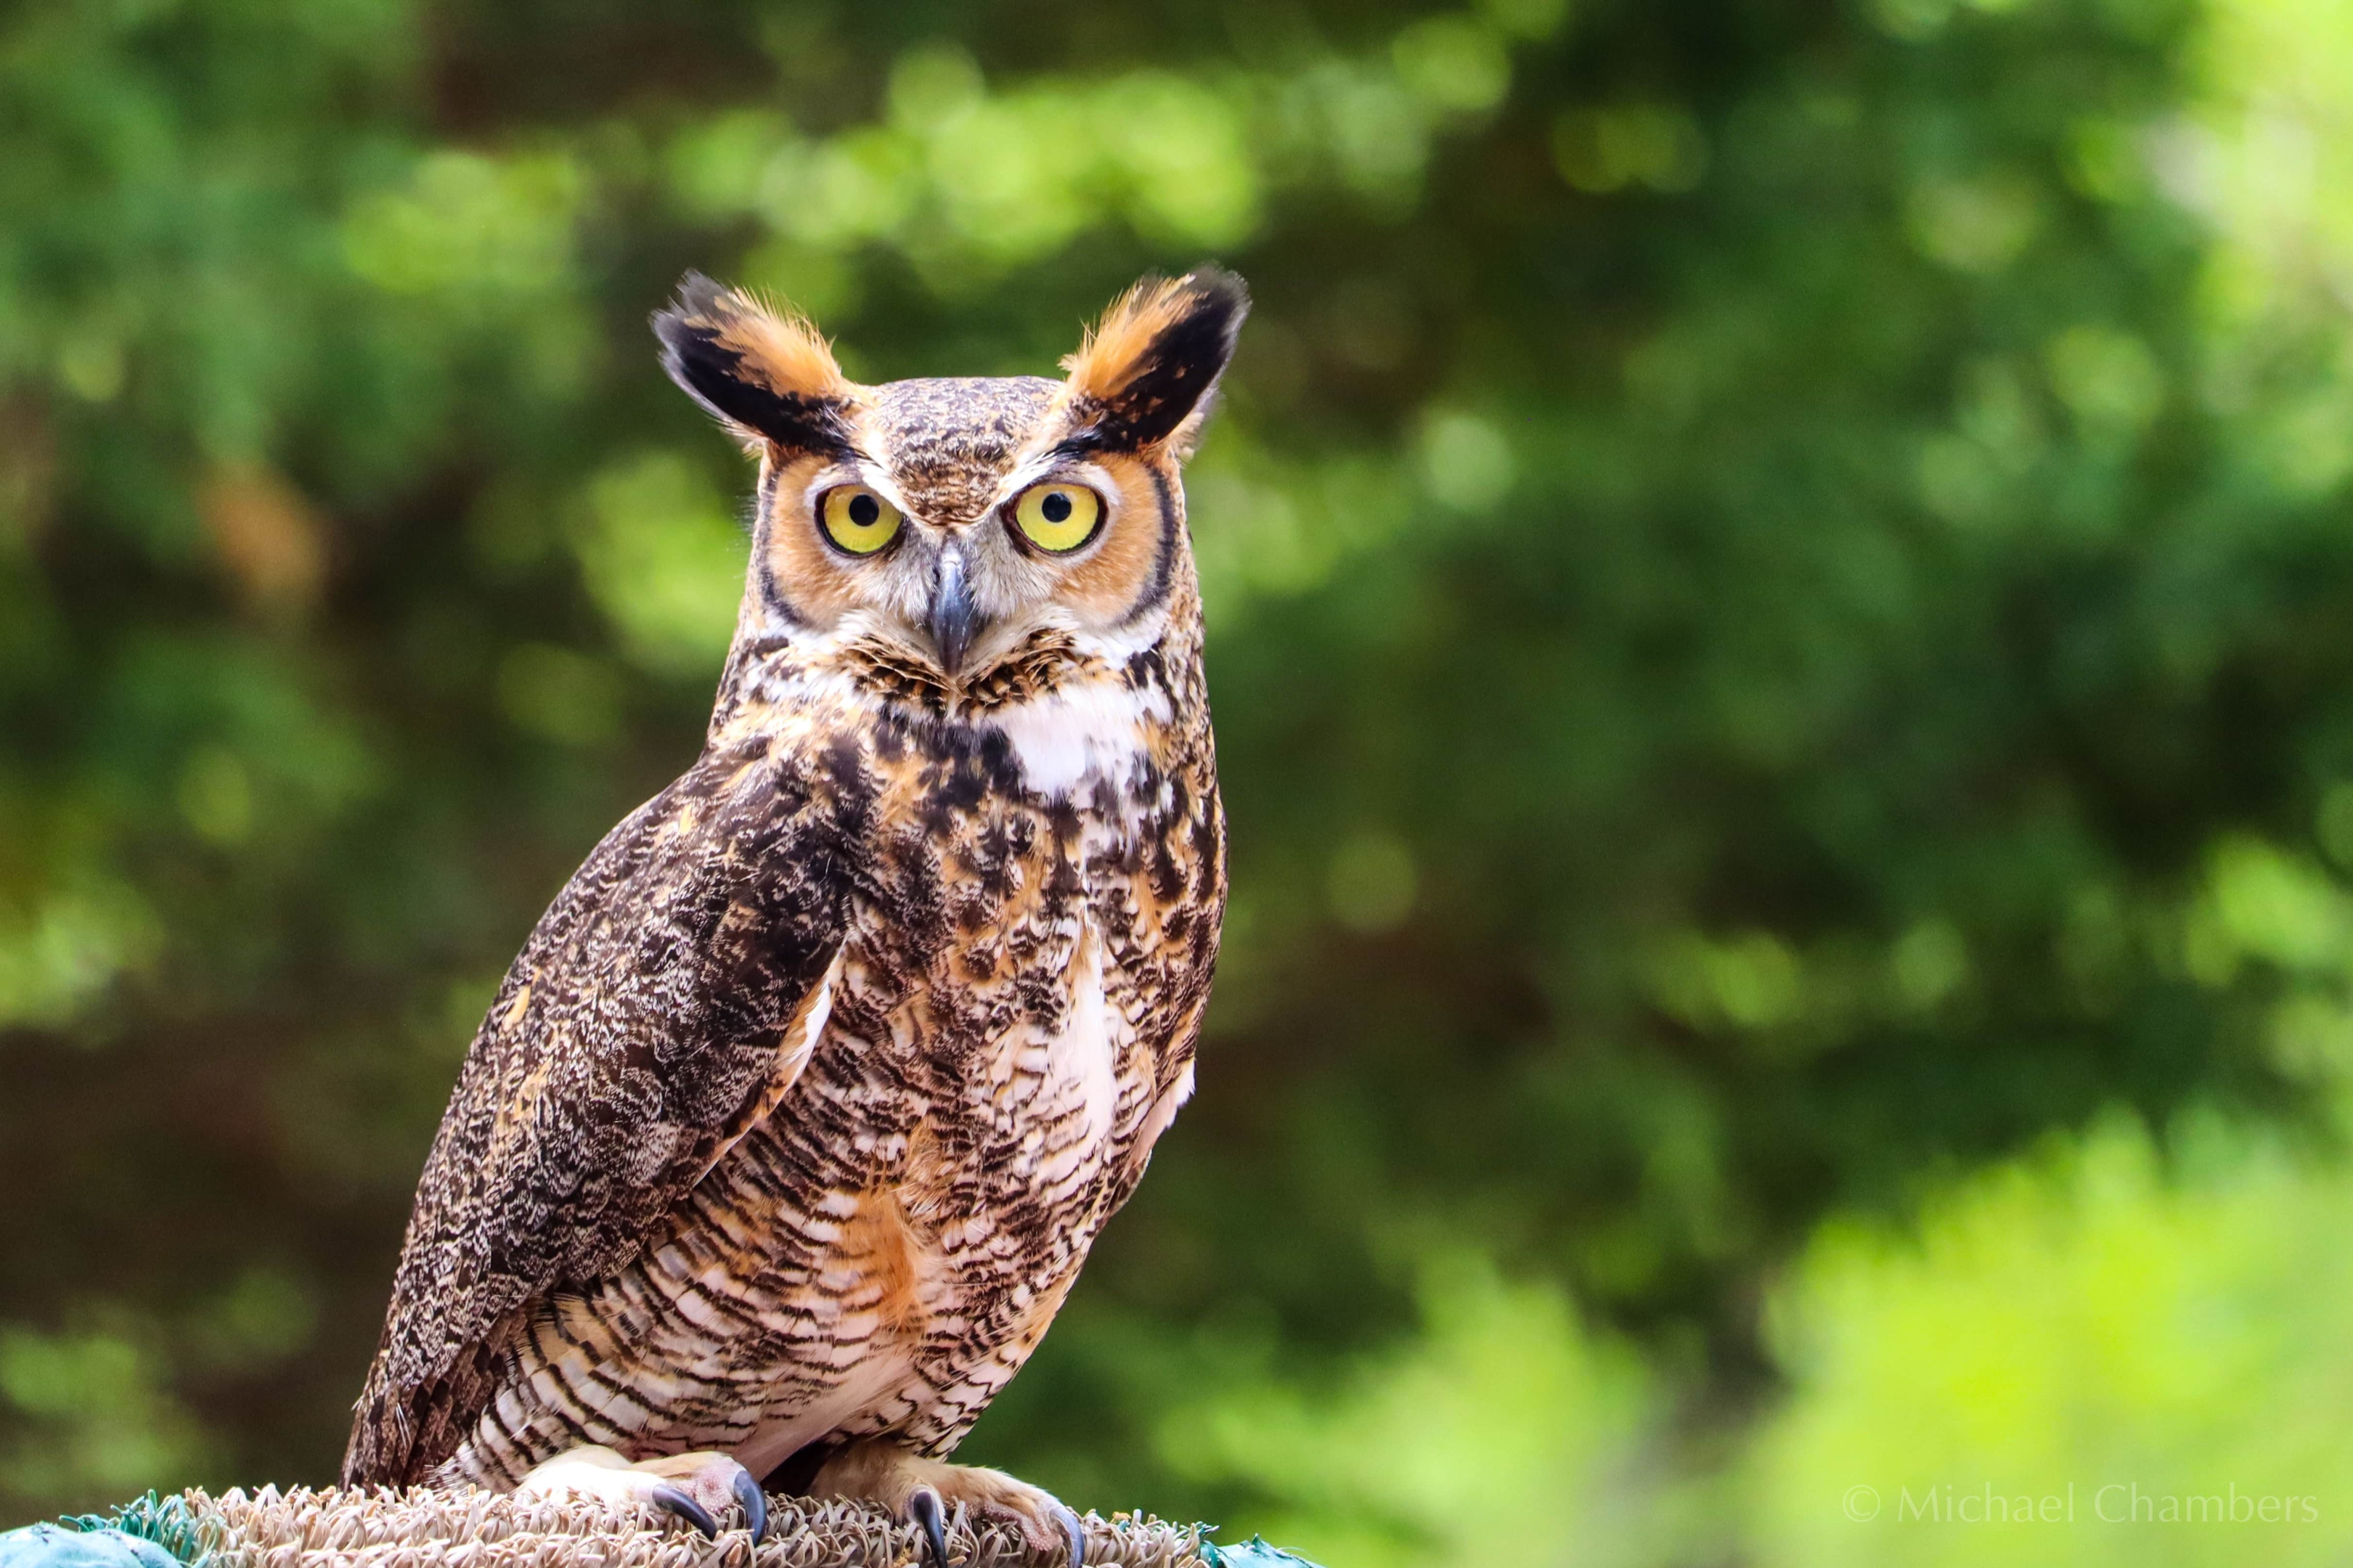 Spiritual Significance of Seeing an Owl During the Day